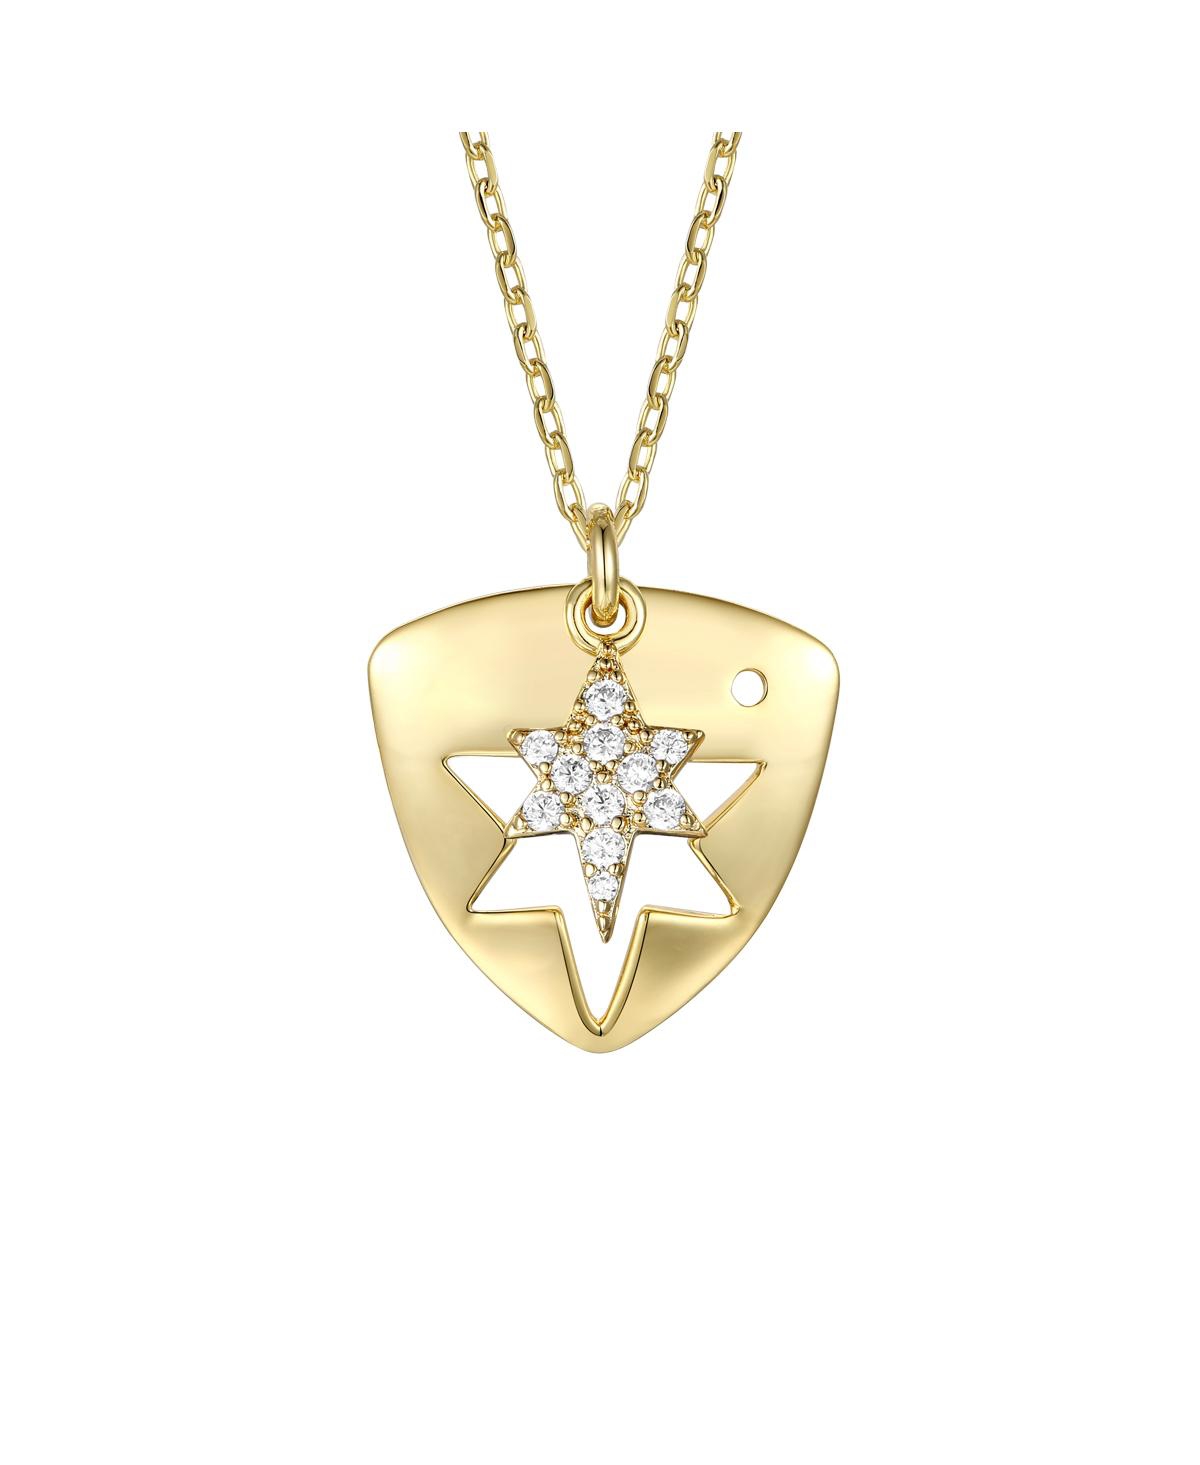 14k Gold Plated with Cubic Zirconia Laser-Cut 6-Pointed Star Triangle Shield Double Pendant Charm Necklace - Gold